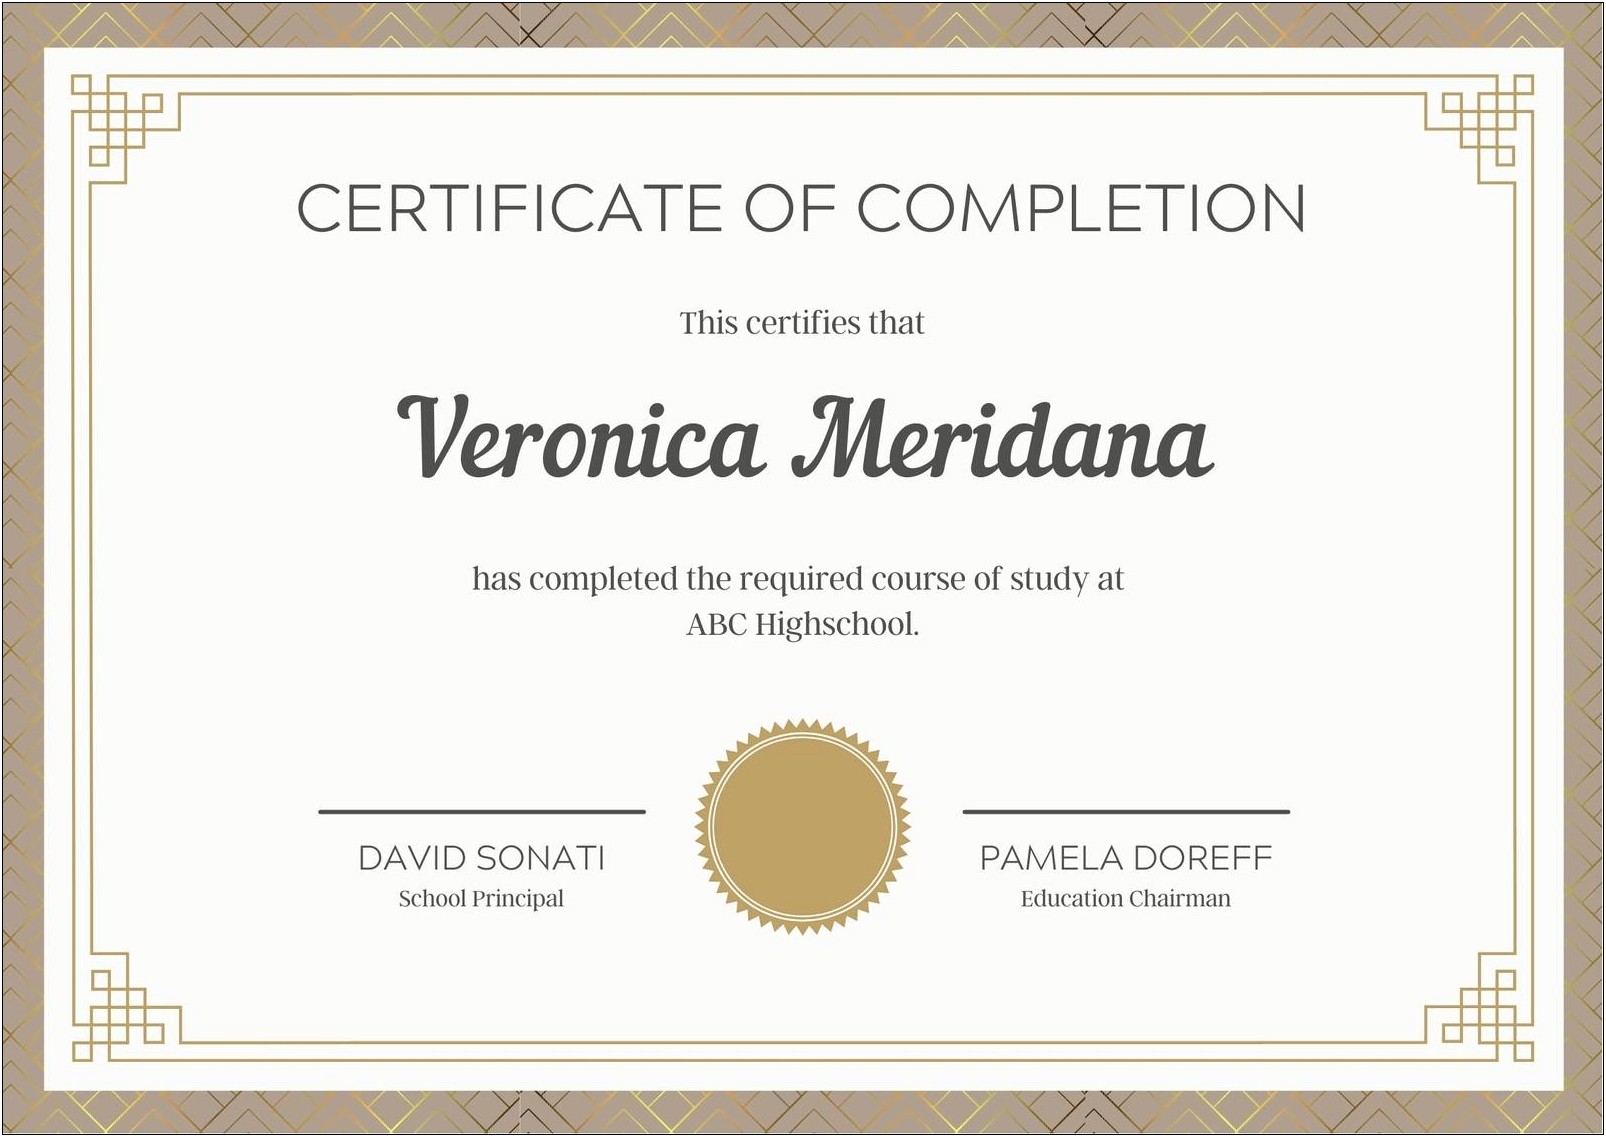 Free Business Certificate Of Completion Templates